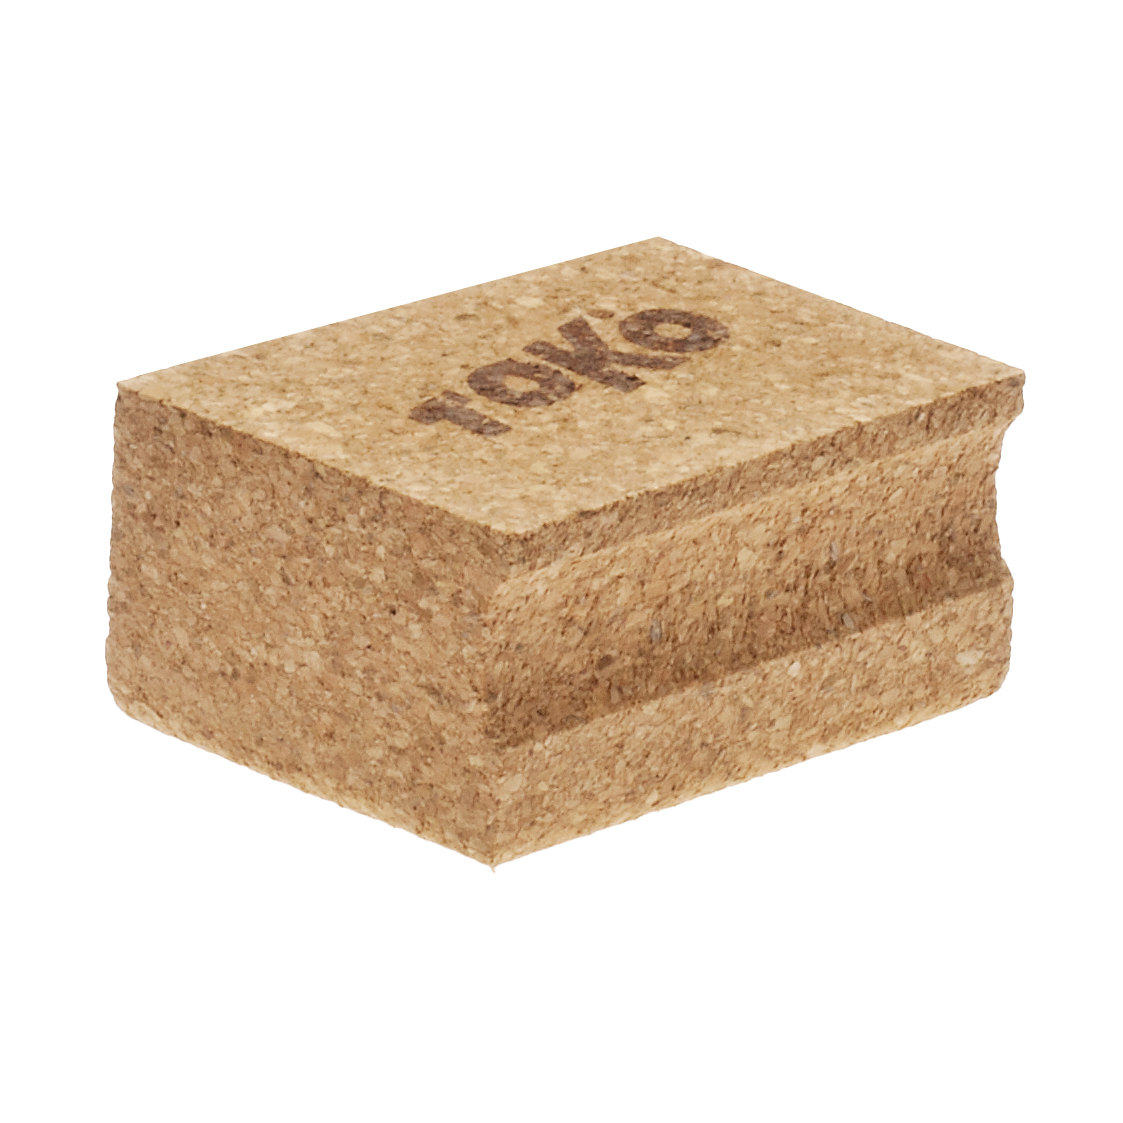 A product picture of the Toko Wax Cork